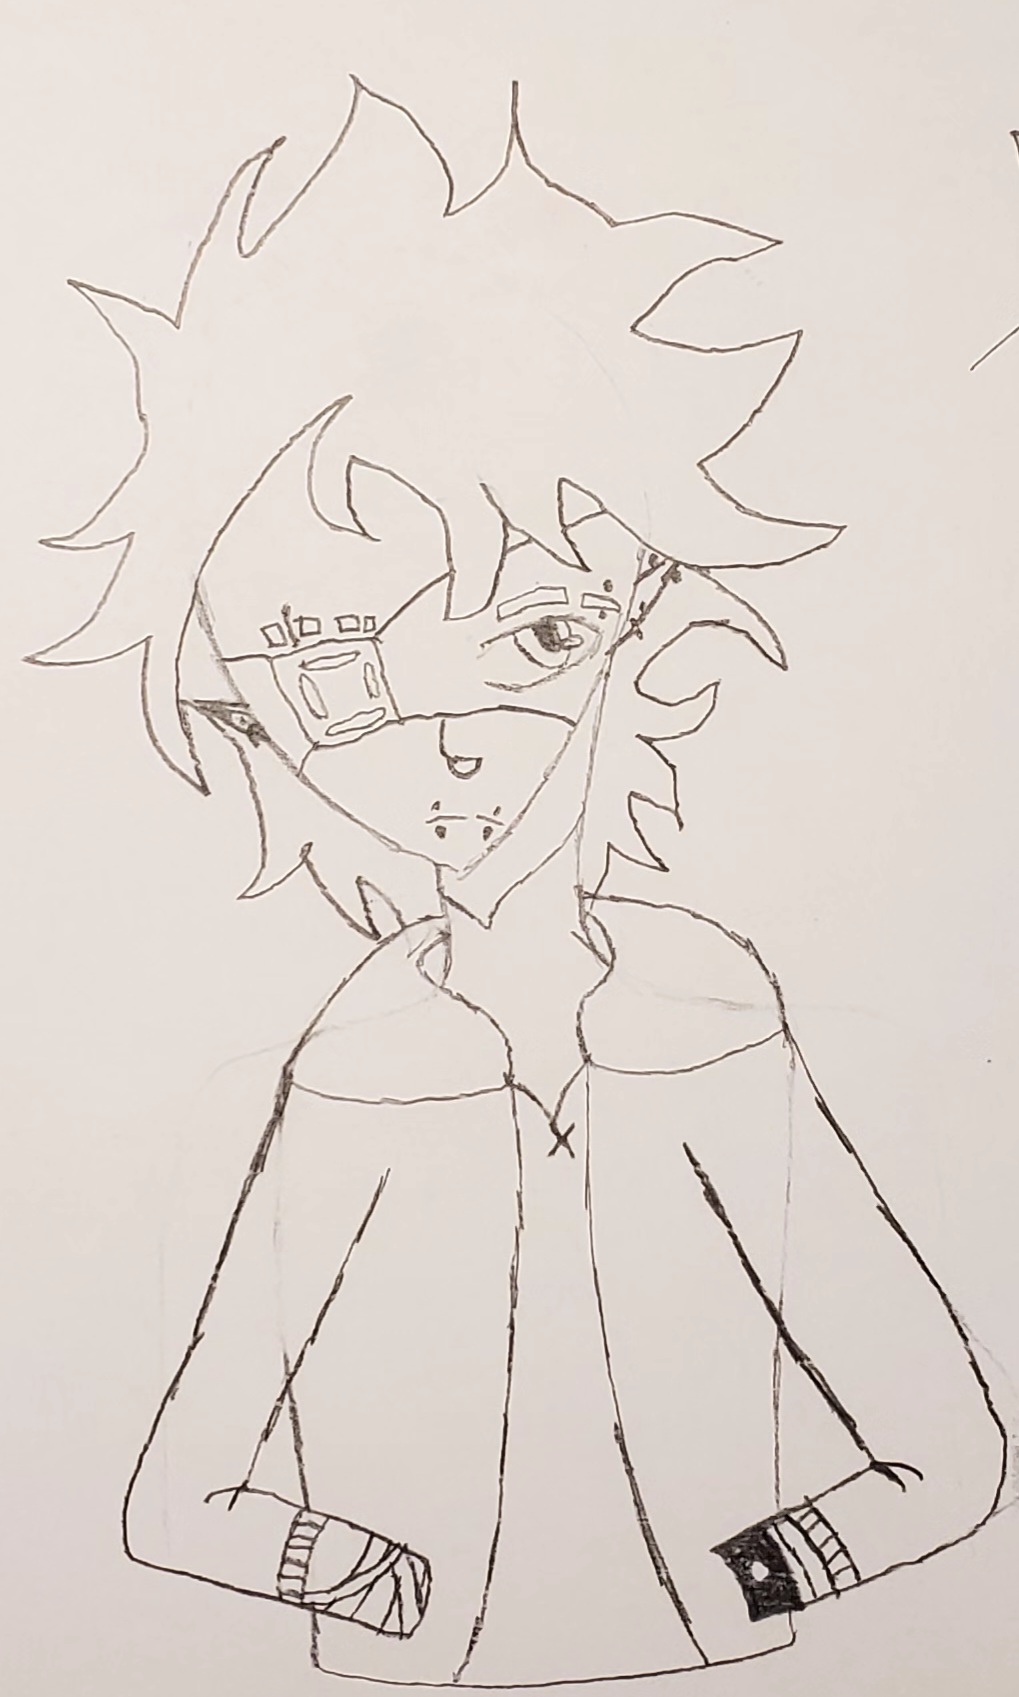 Teen drawing of a character with wild spiky hair, eyelash piercings, an eyepatch on their right eye, snakebite mouth piercings, who is frowning, wearing a hoody with a plain shift underneath. Their hands are in their pockets. The drawing is in grey pencil and it's from the waist up.